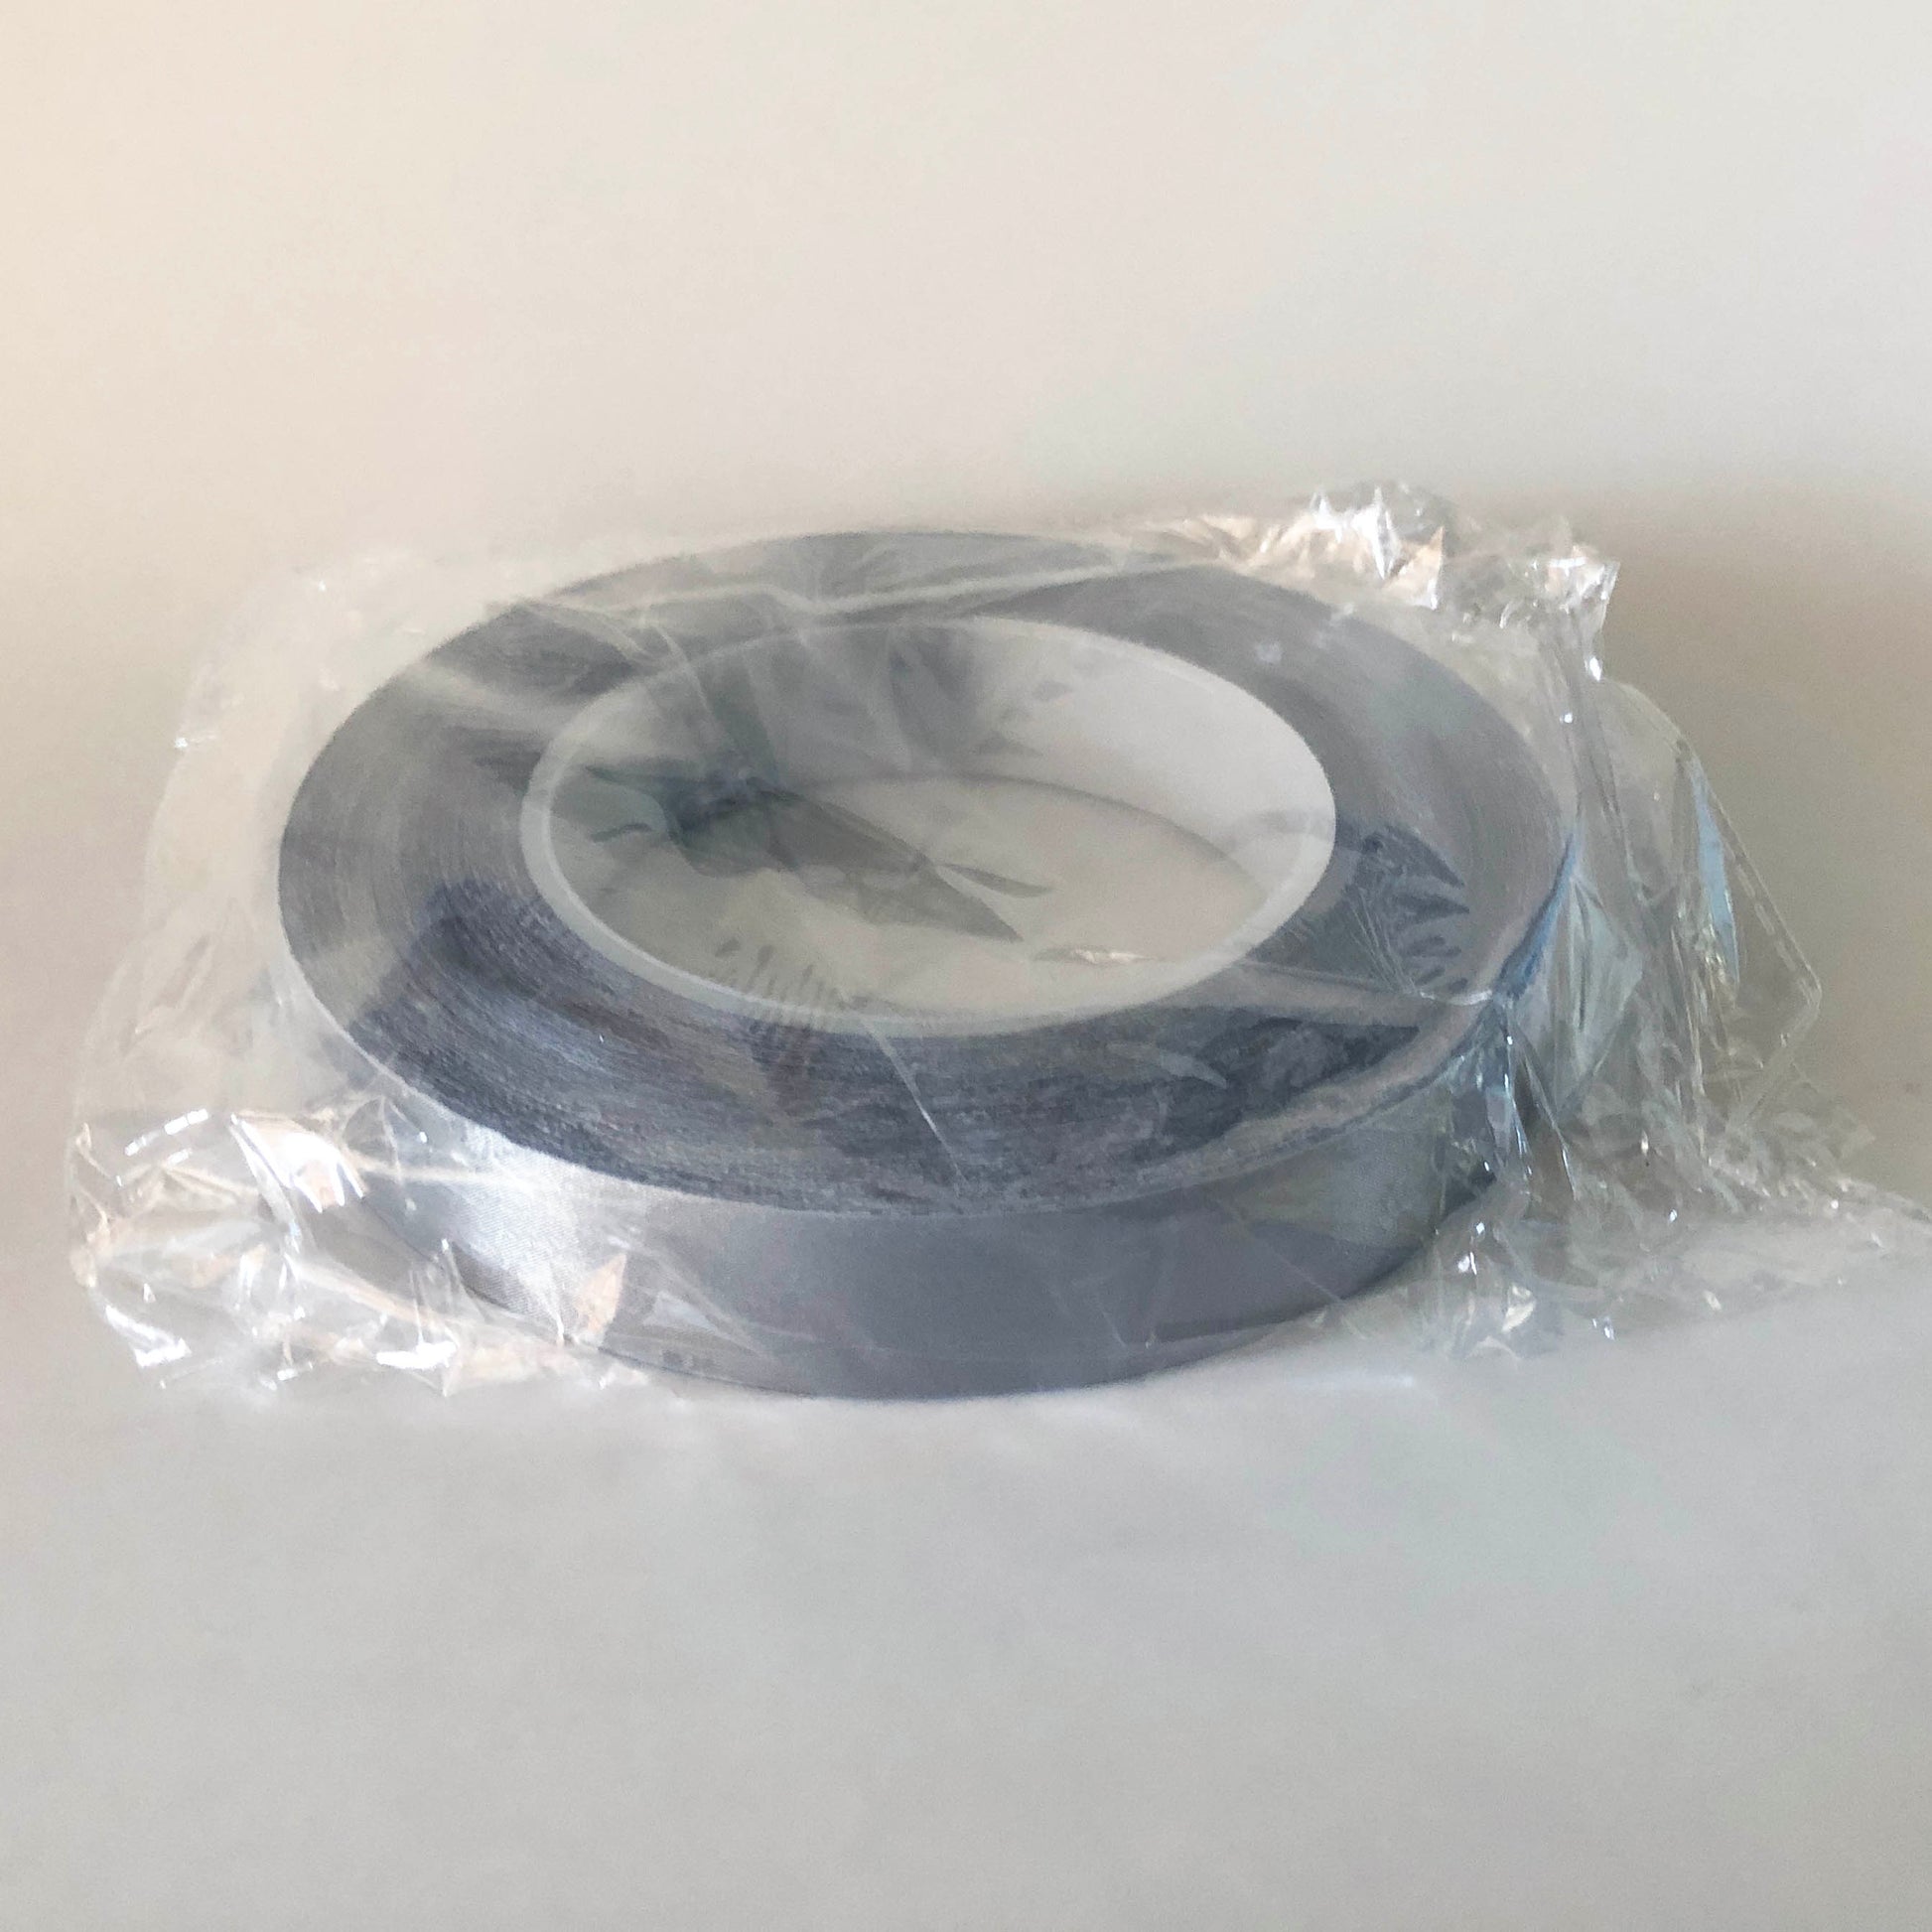 A roll of conductive tape in a bag. The core of the roll is 7cm and the tape is 2cm wide. 